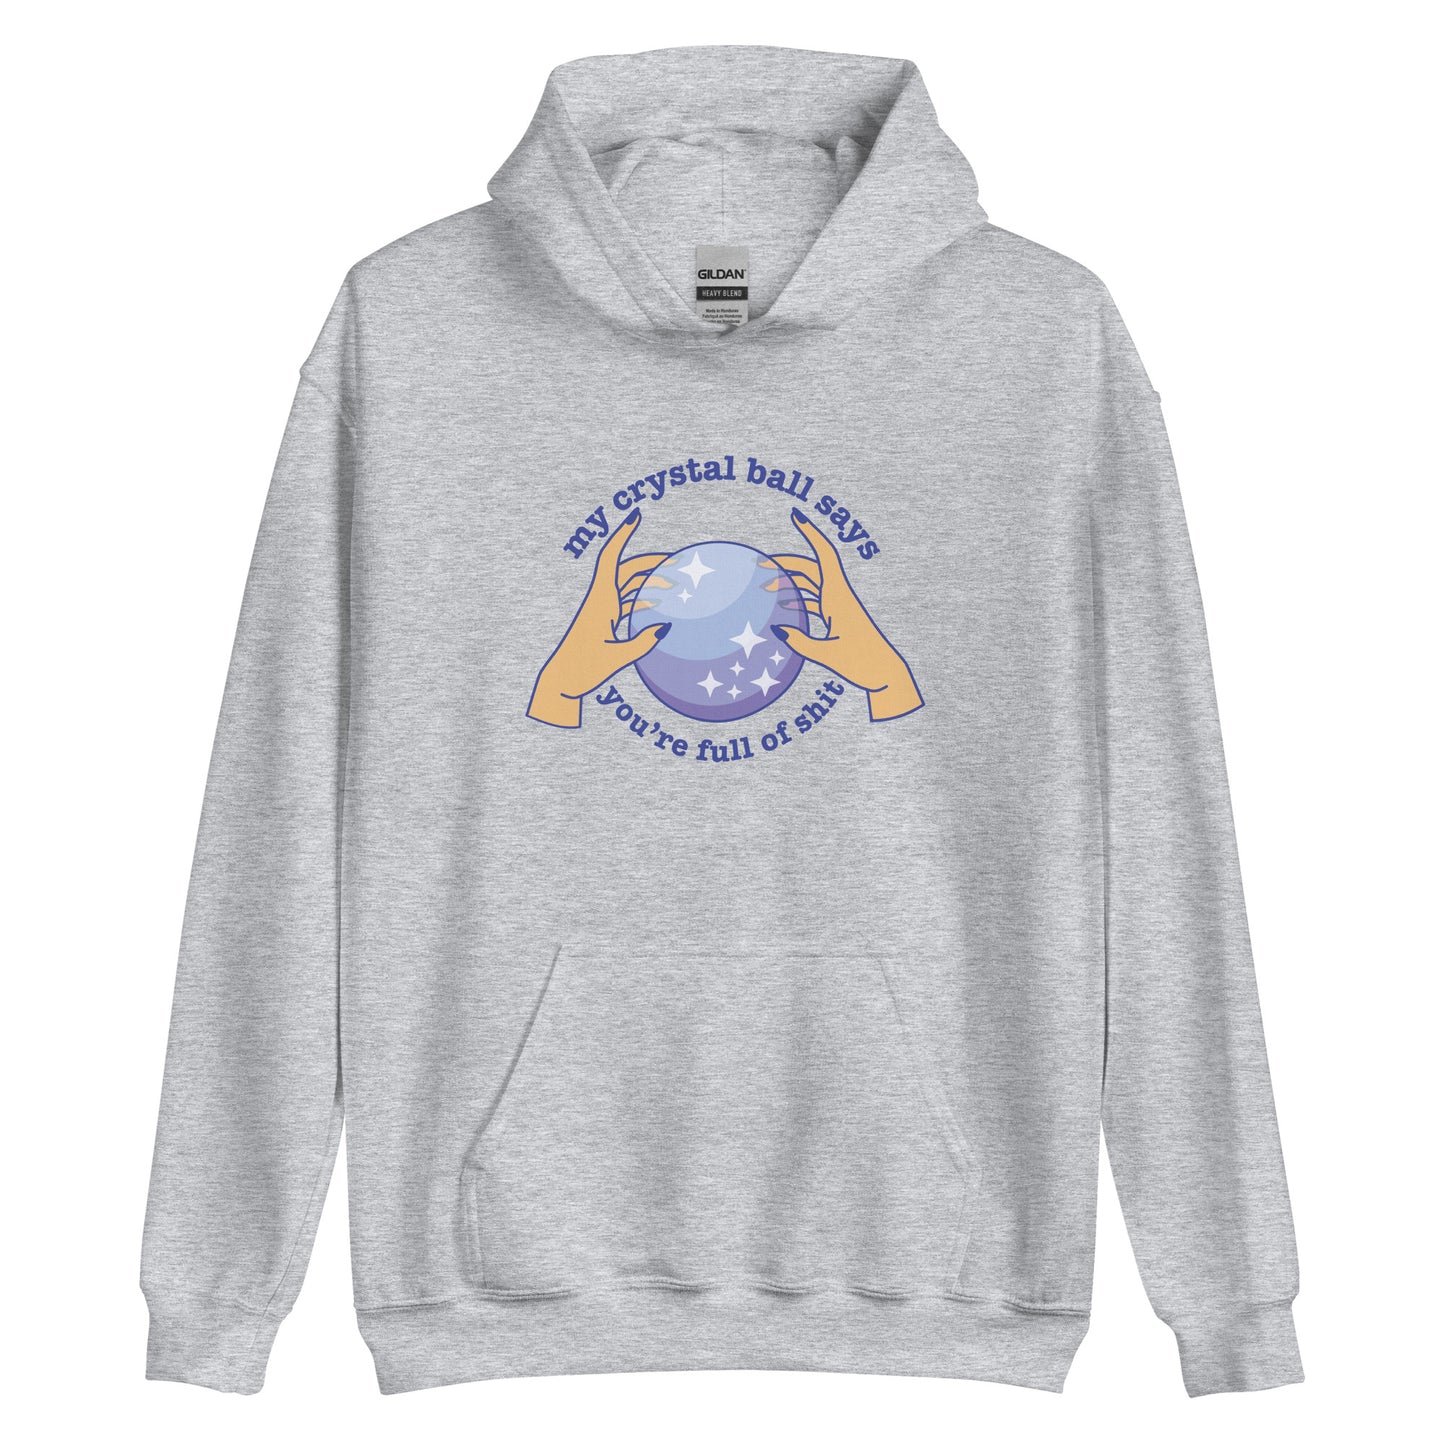 A light gray hoodie with a picture of hands on a crystal ball and text reading "My crystal ball says you're full of shit"